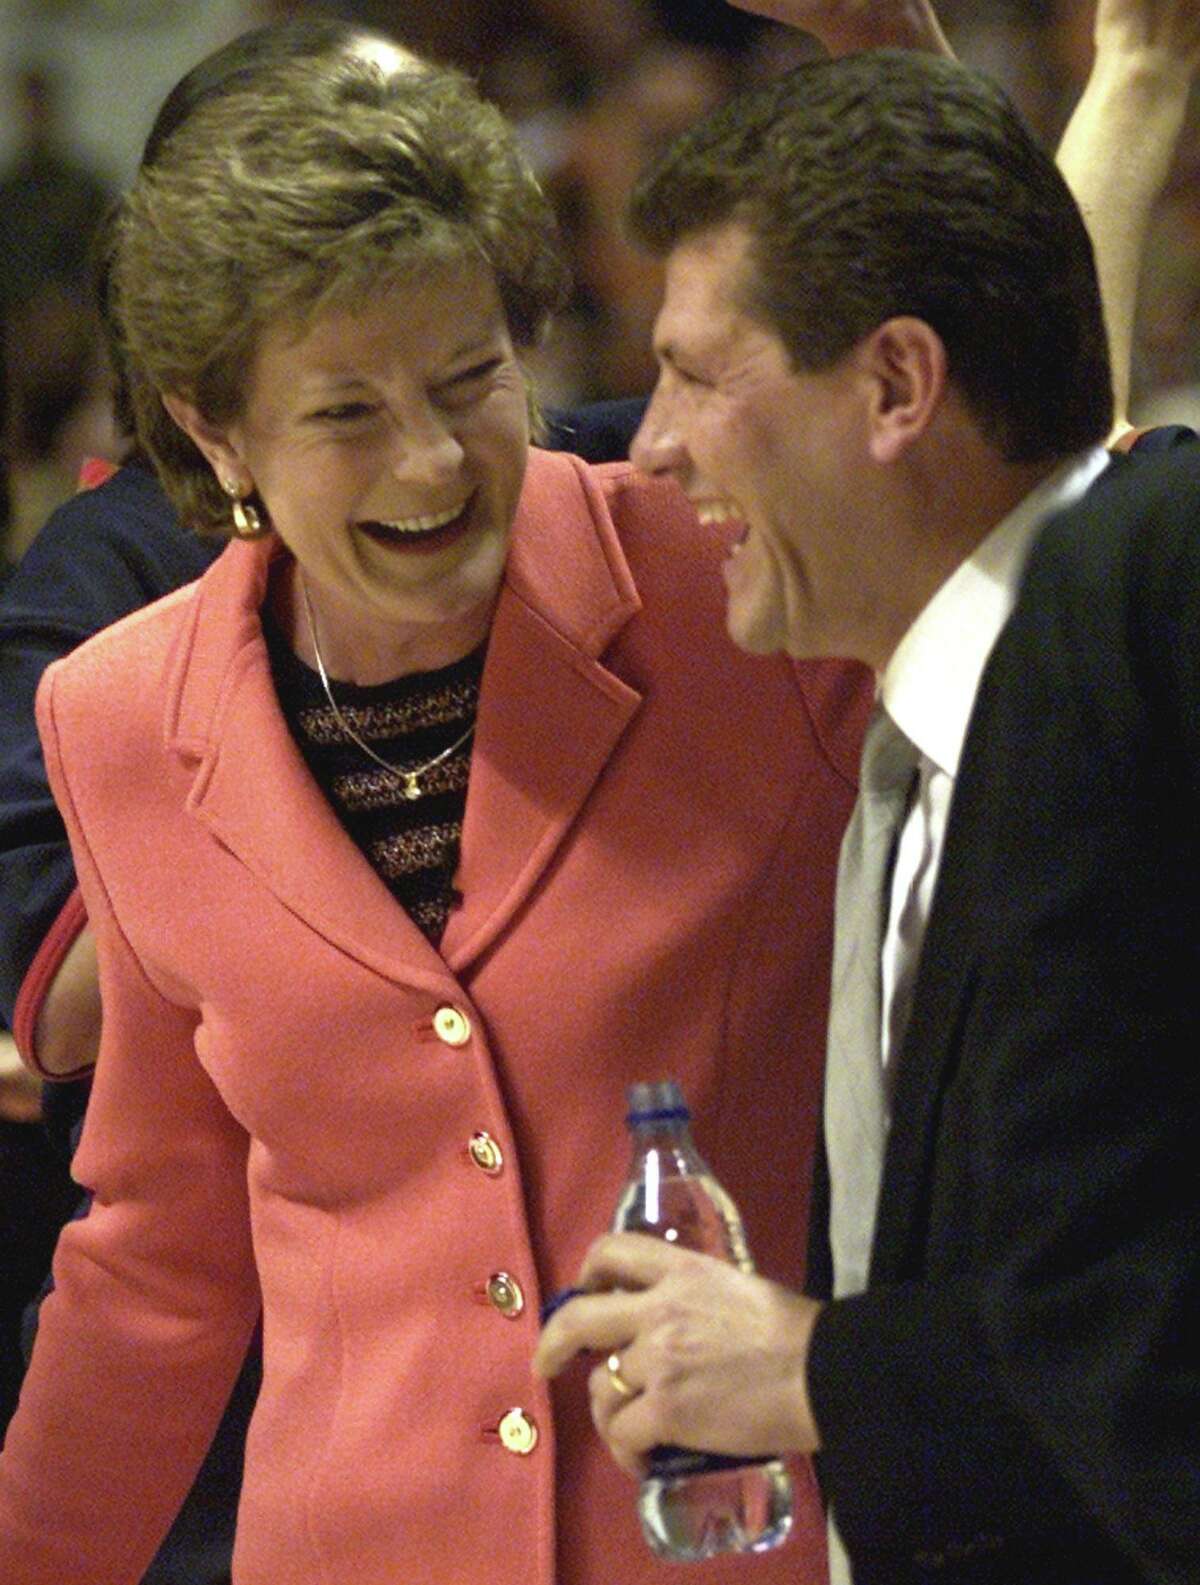 Tennessee head coach Pat Summitt, left, and Connecticut's Geno Auriemma share a laugh before their game Saturday, Jan. 5, 2002 in Knoxville, Tenn. Connecticut defeated Tennessee 86-72.(AP Photo/Wade Payne) HOUCHRON CAPTION (03/31/2002-2-STAR): Tennessee's Pat Summitt, left, and Connecticut's Geno Auriemma show that success in coaching women's college basketball comes in both genders. What they haven't always shared is a warm relationship.